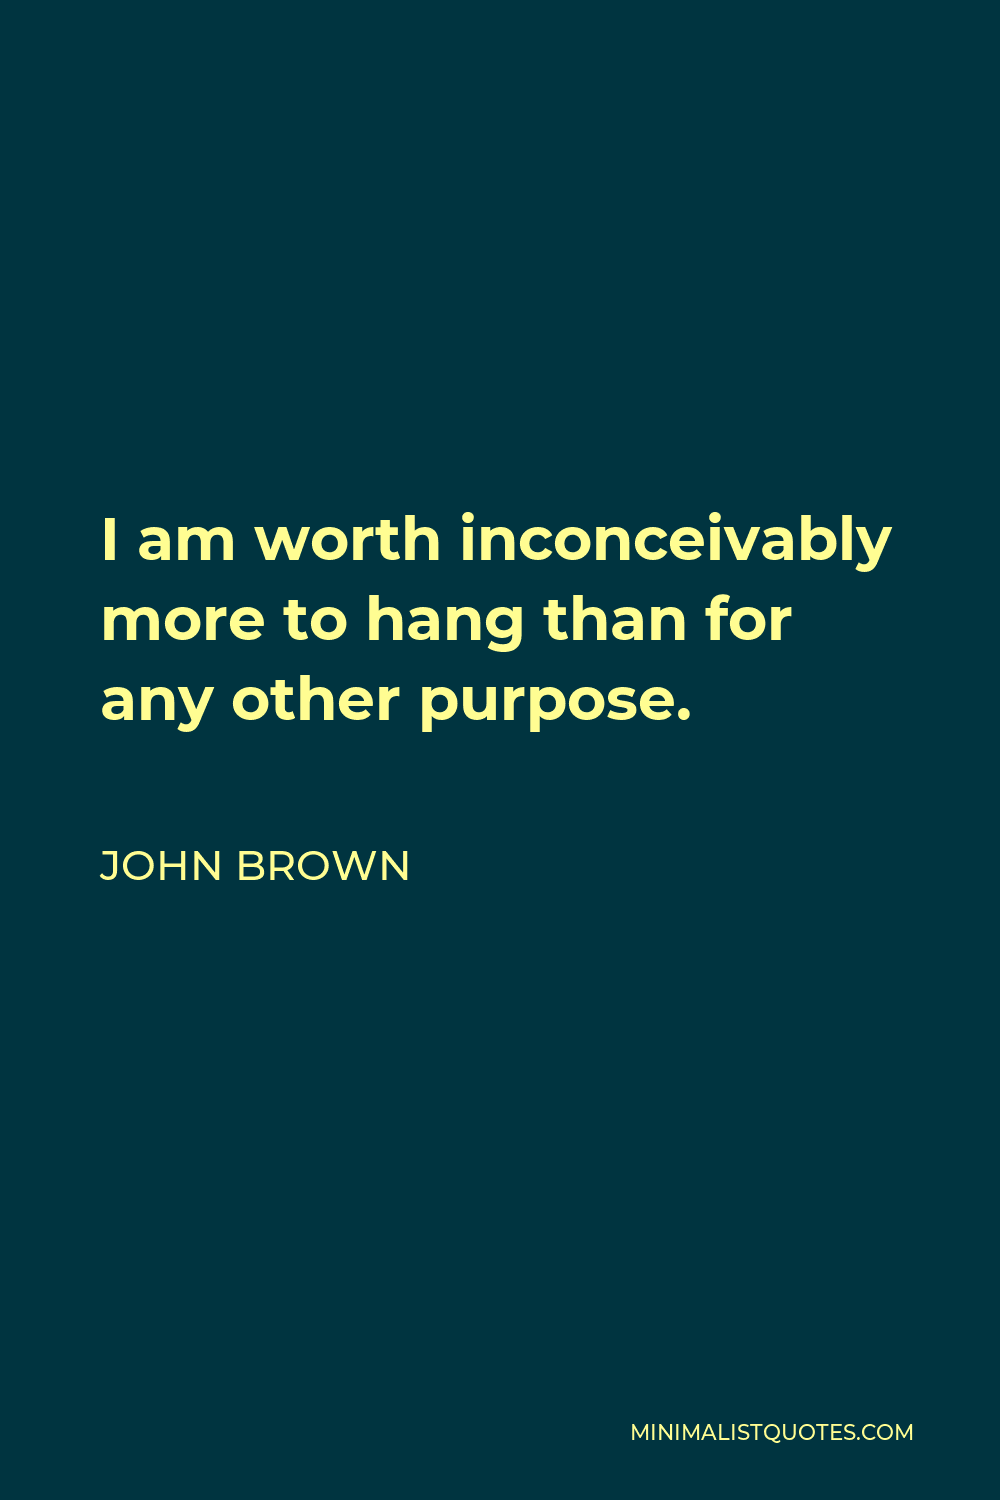 John Brown Quote - I am worth inconceivably more to hang than for any other purpose.